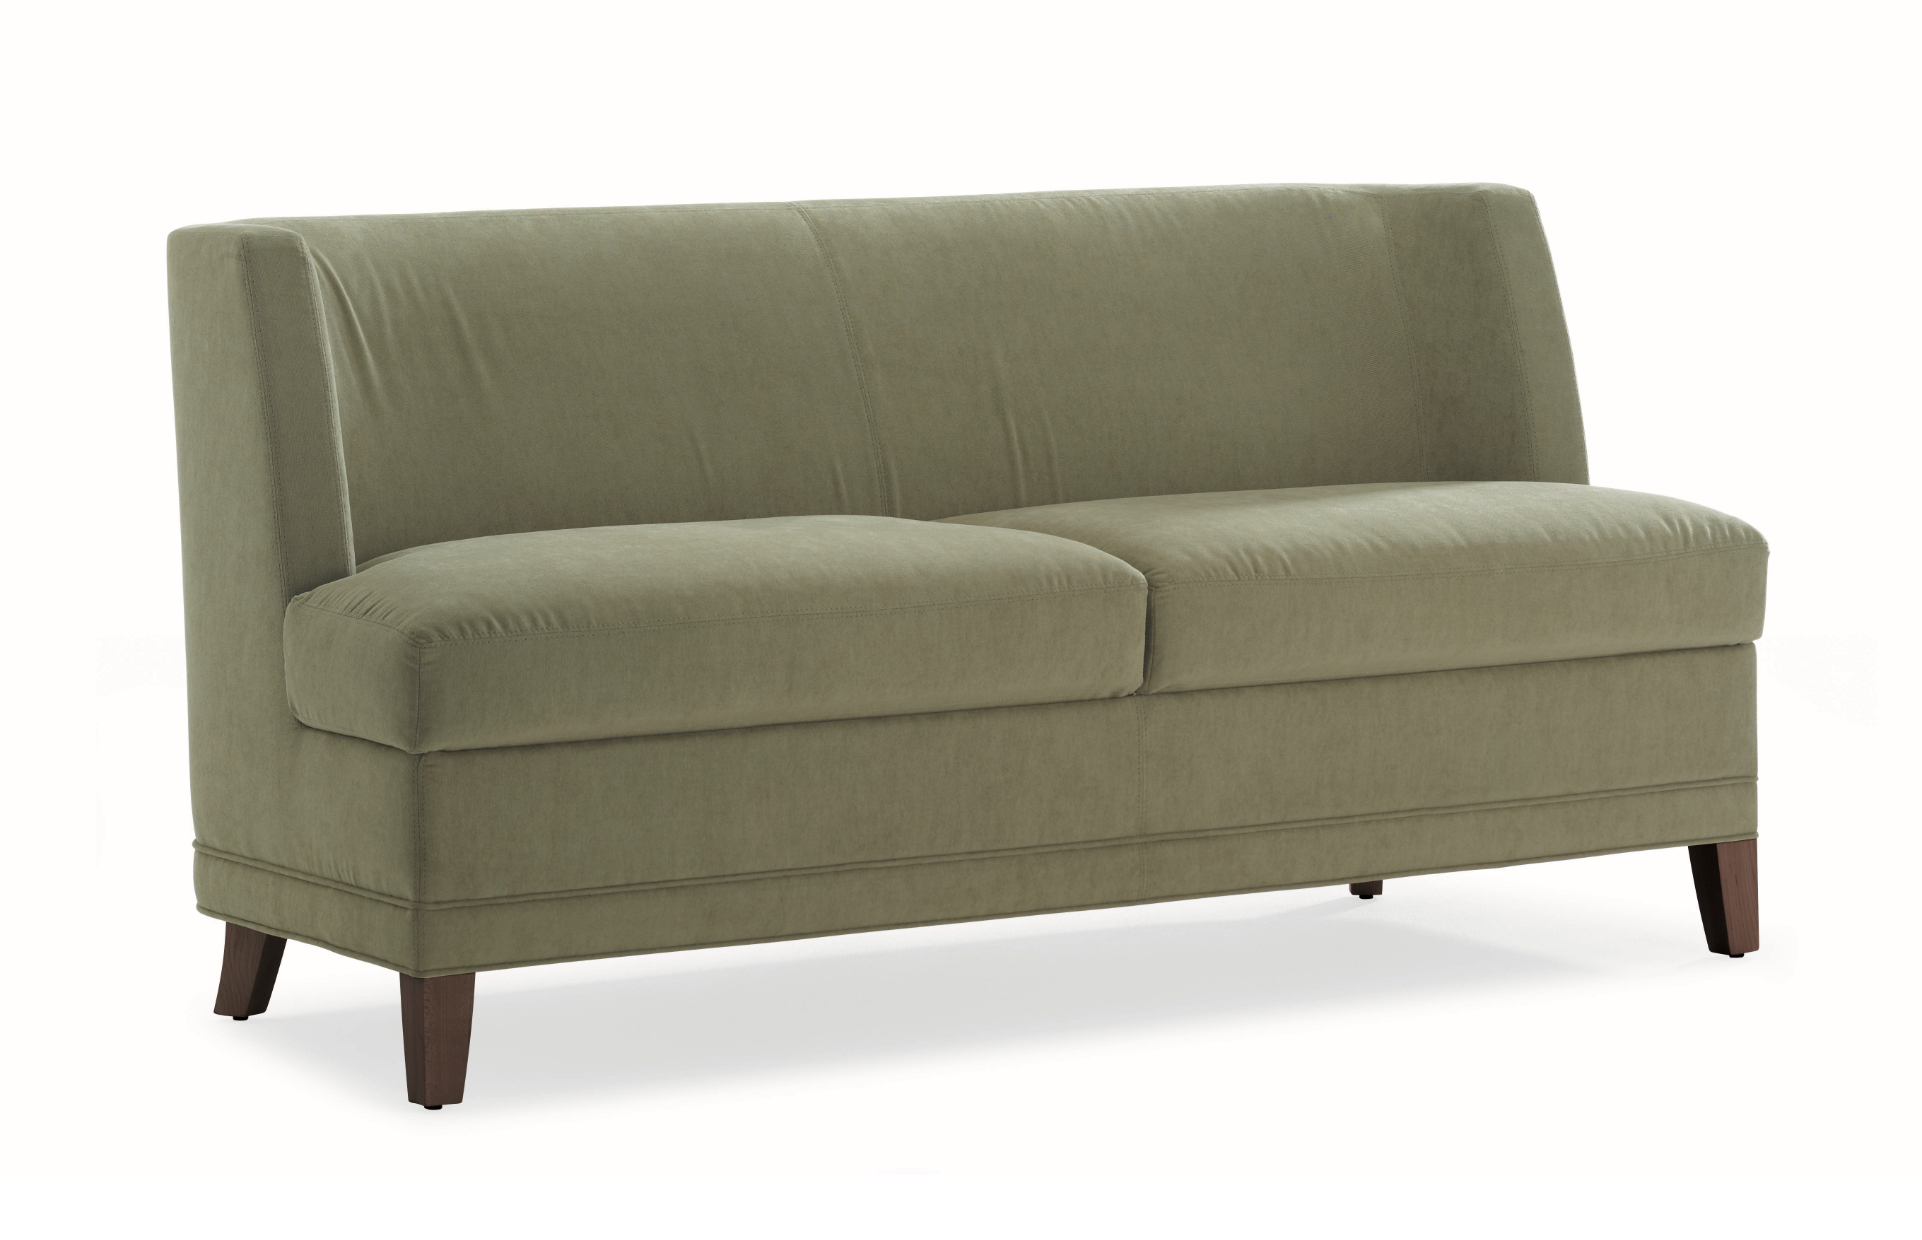 Grey suede office lounge sofa with high armrest and wooden legs